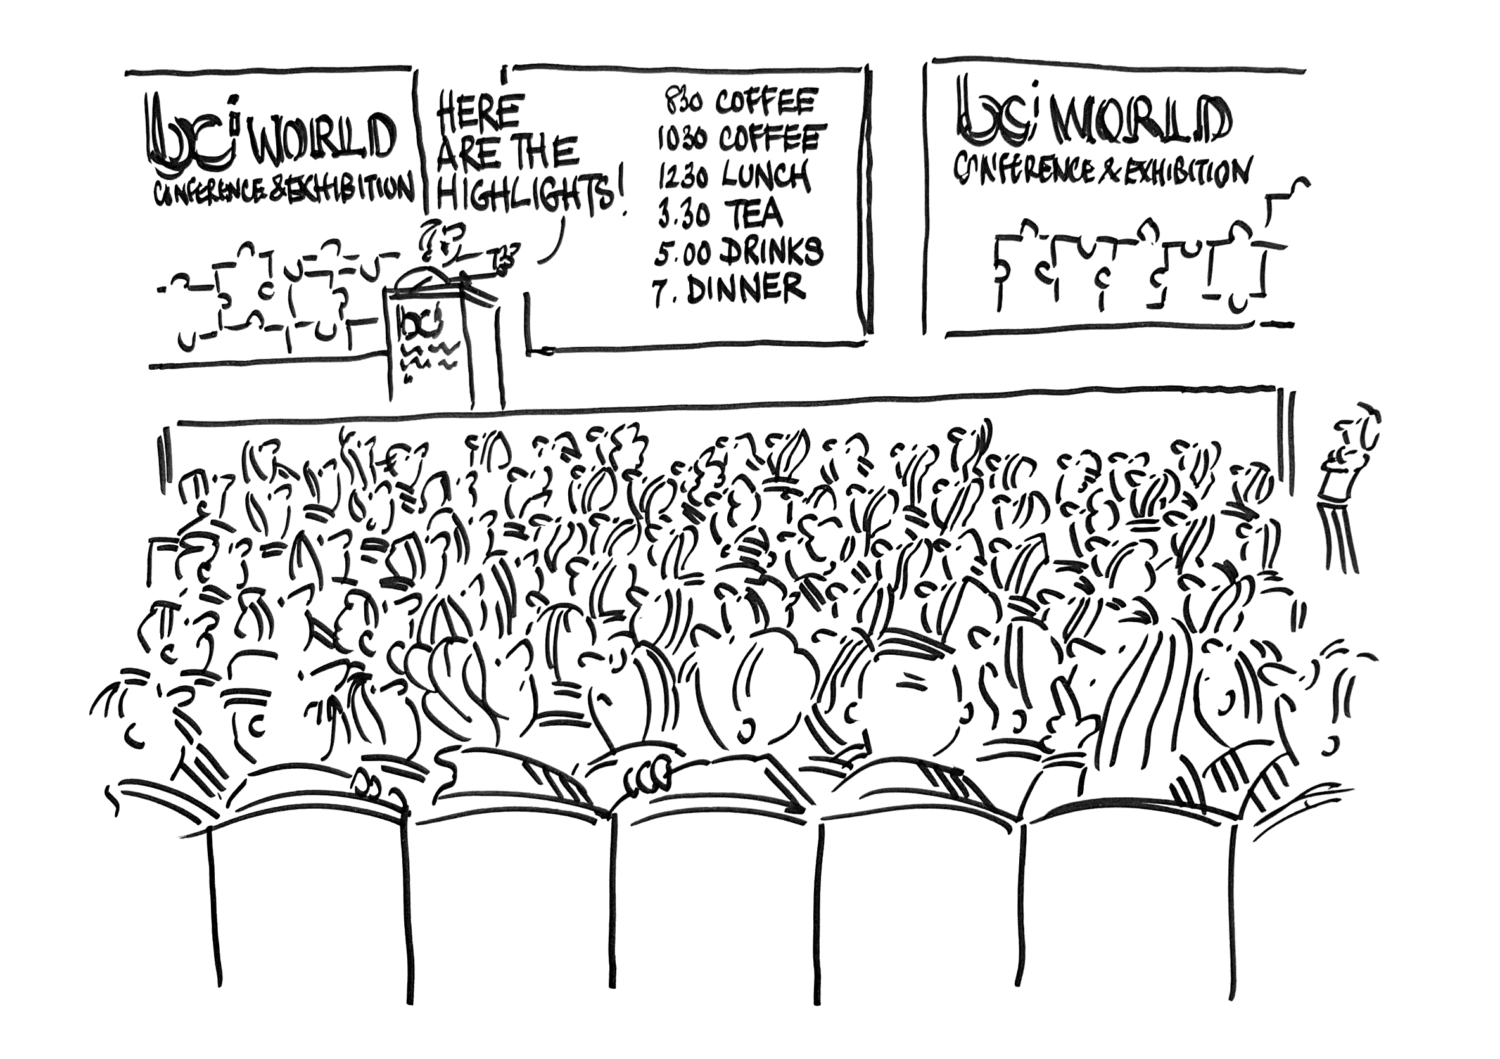 BCI World Conf Highlights.png 2